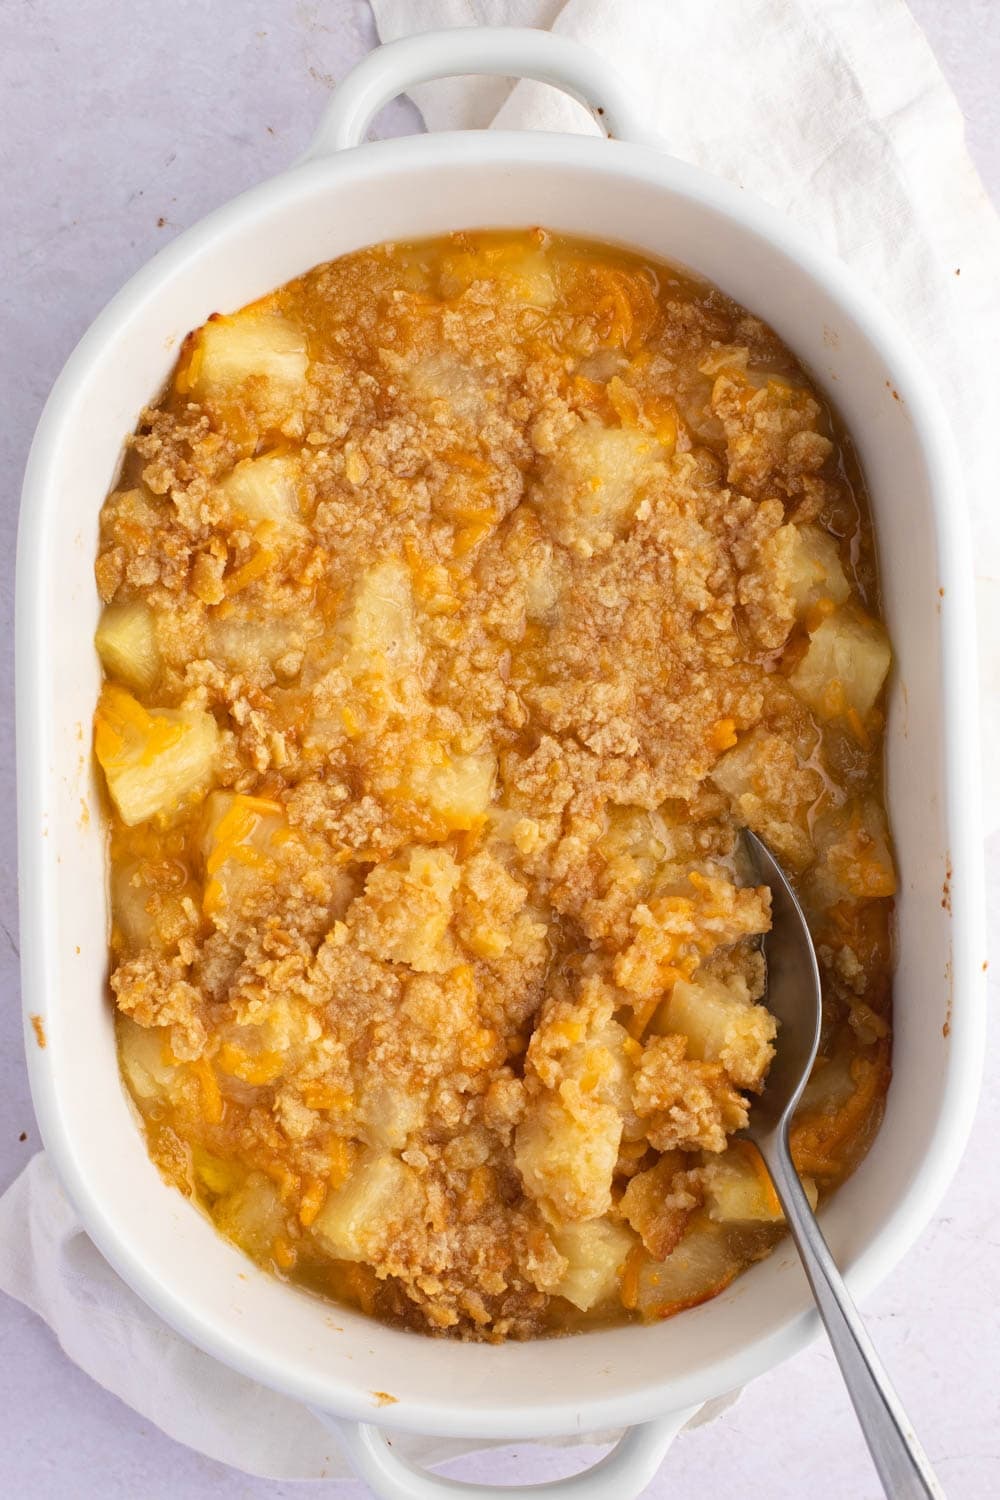 Top View of Paula Deen's Pineapple Casserole With Spoon Dipped on It